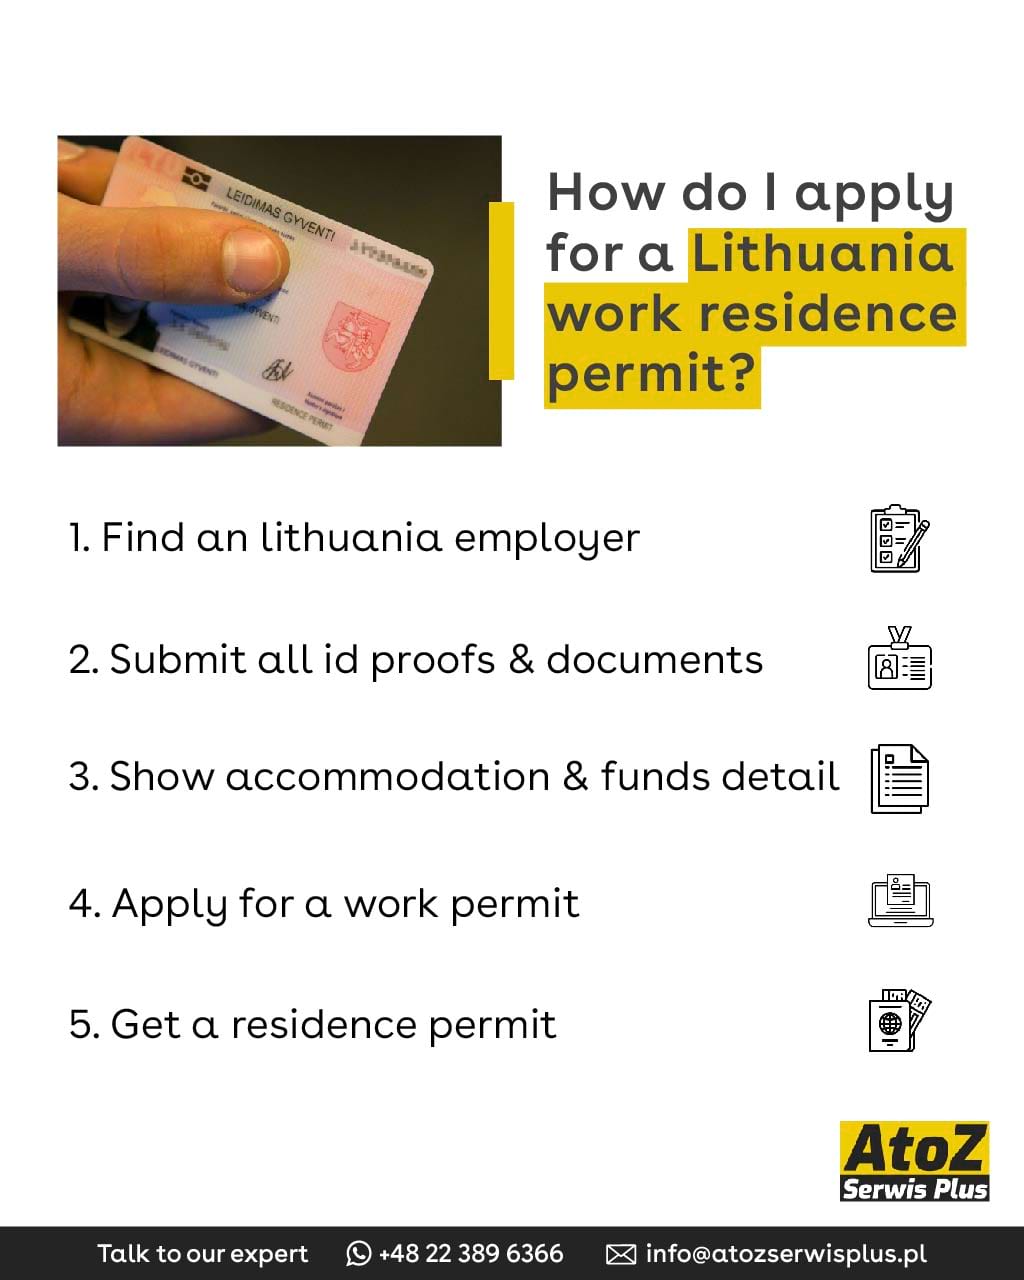 how-do-i-apply-for-a-lithuania-work-residence-permit.jpg